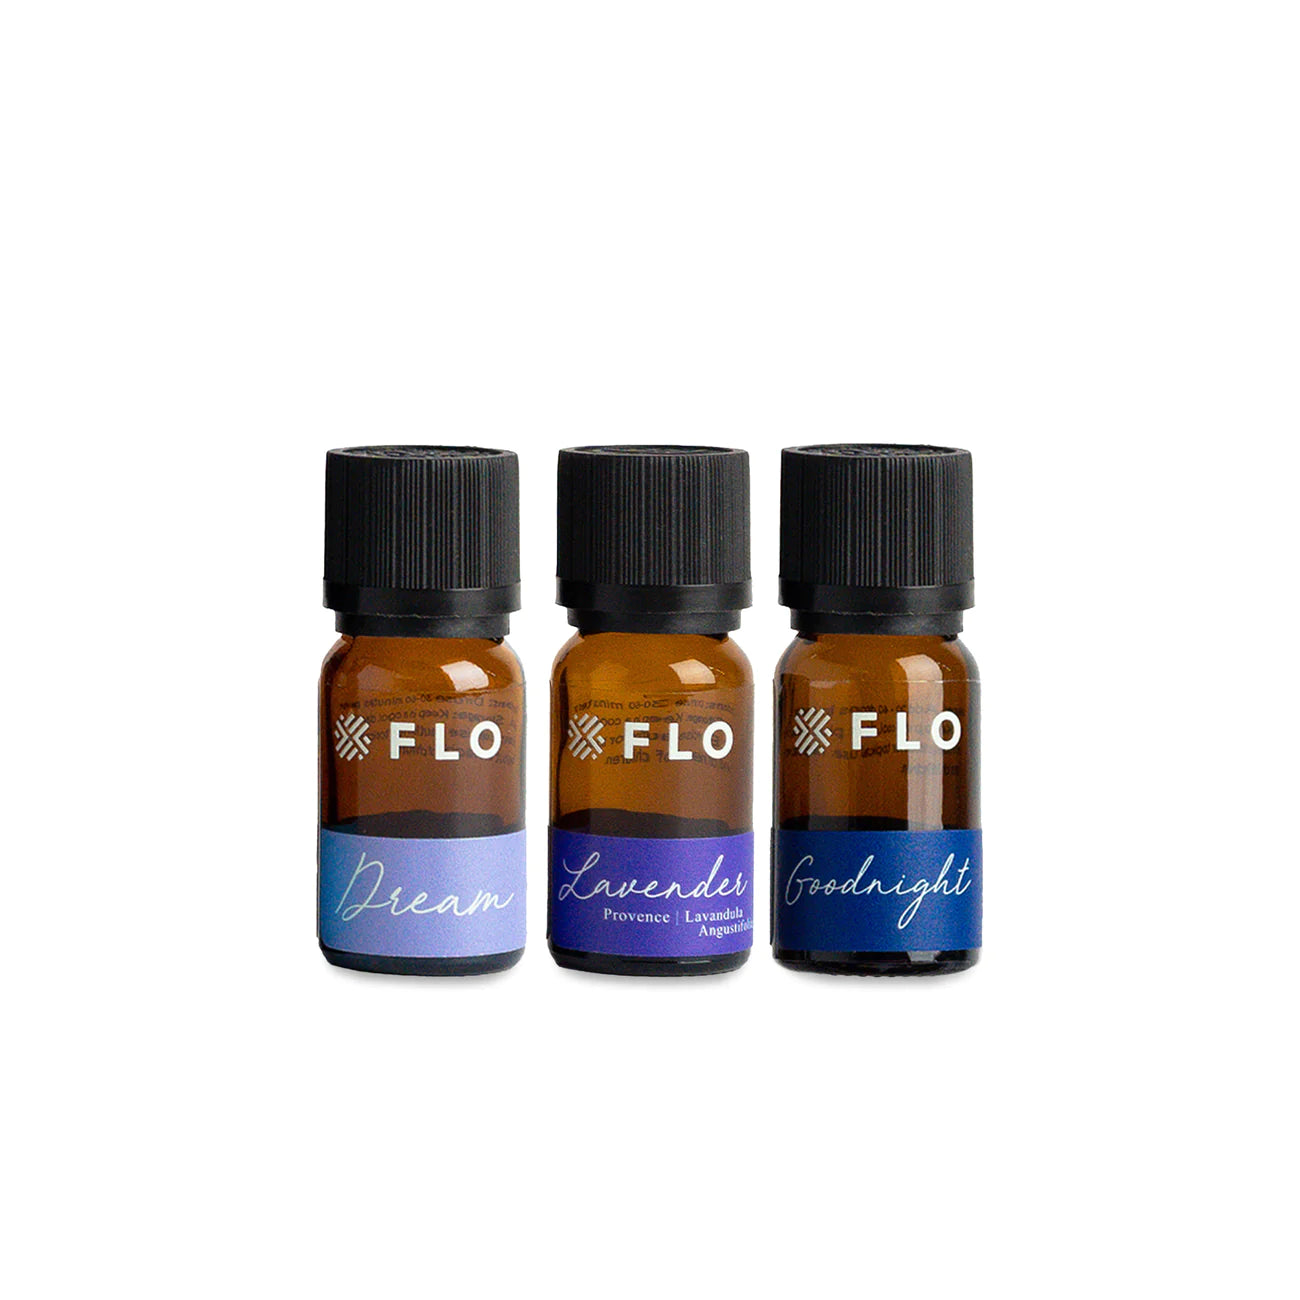 FLO Essential Oil Collection